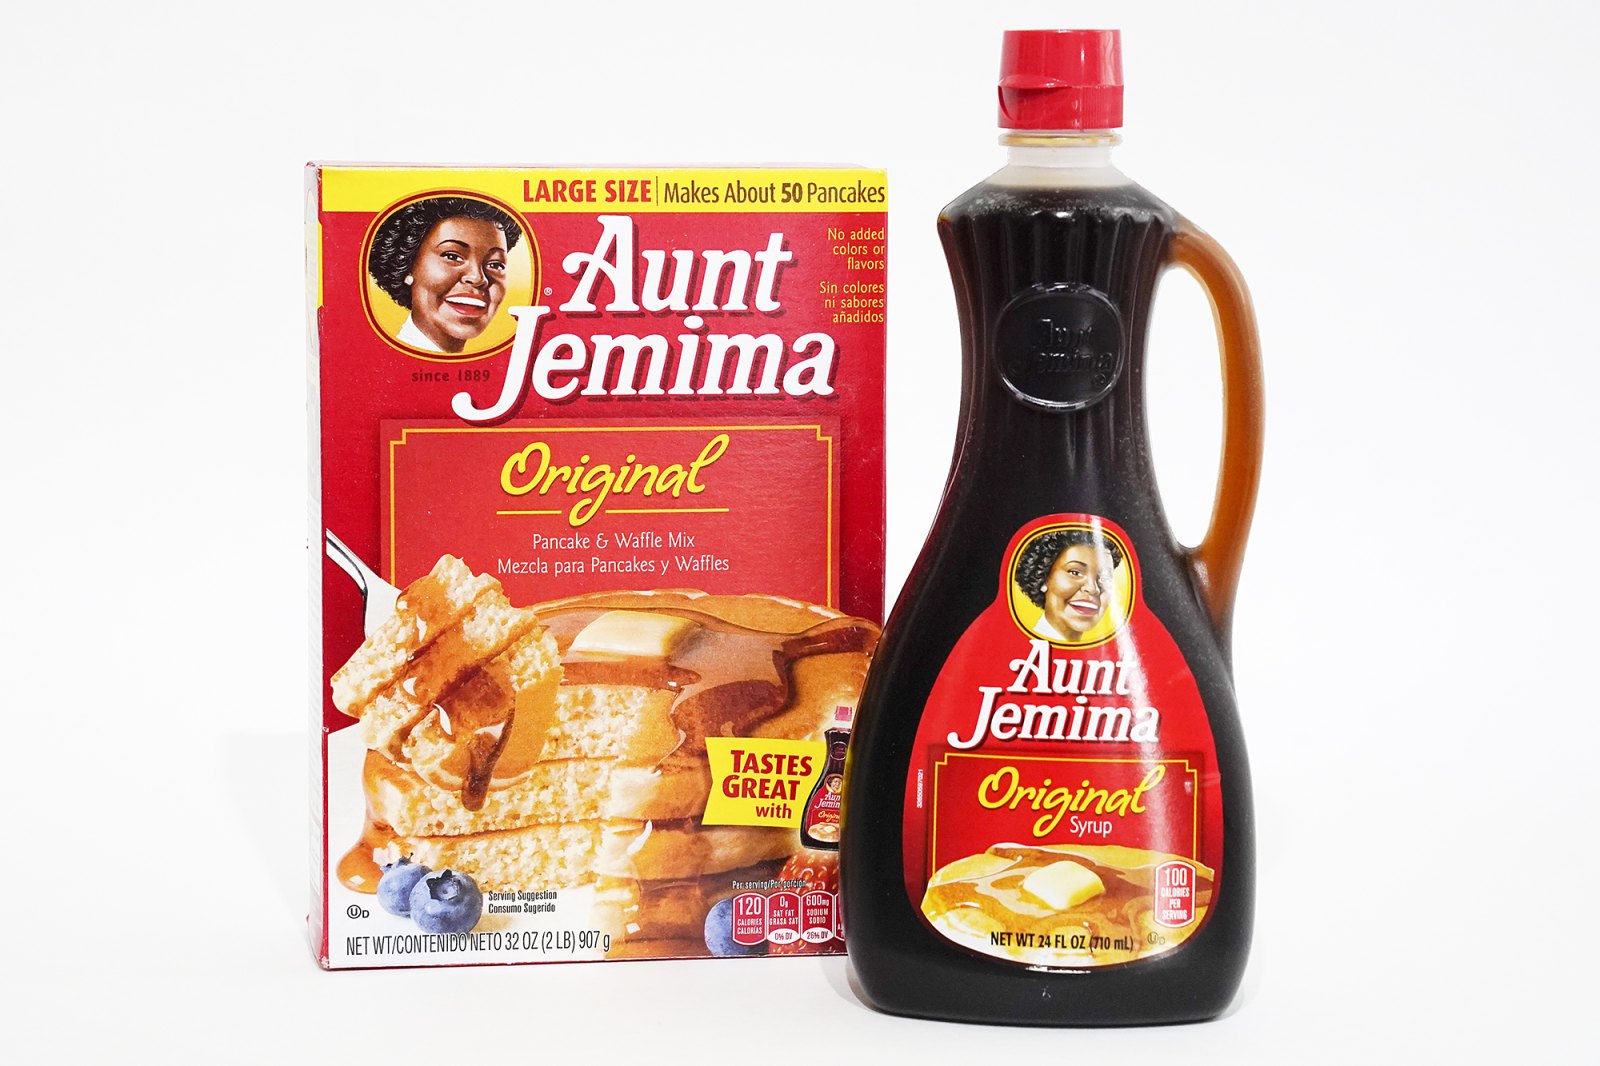 Aunt Jemima products Food Brands Changing Their Racially Insensitive Names